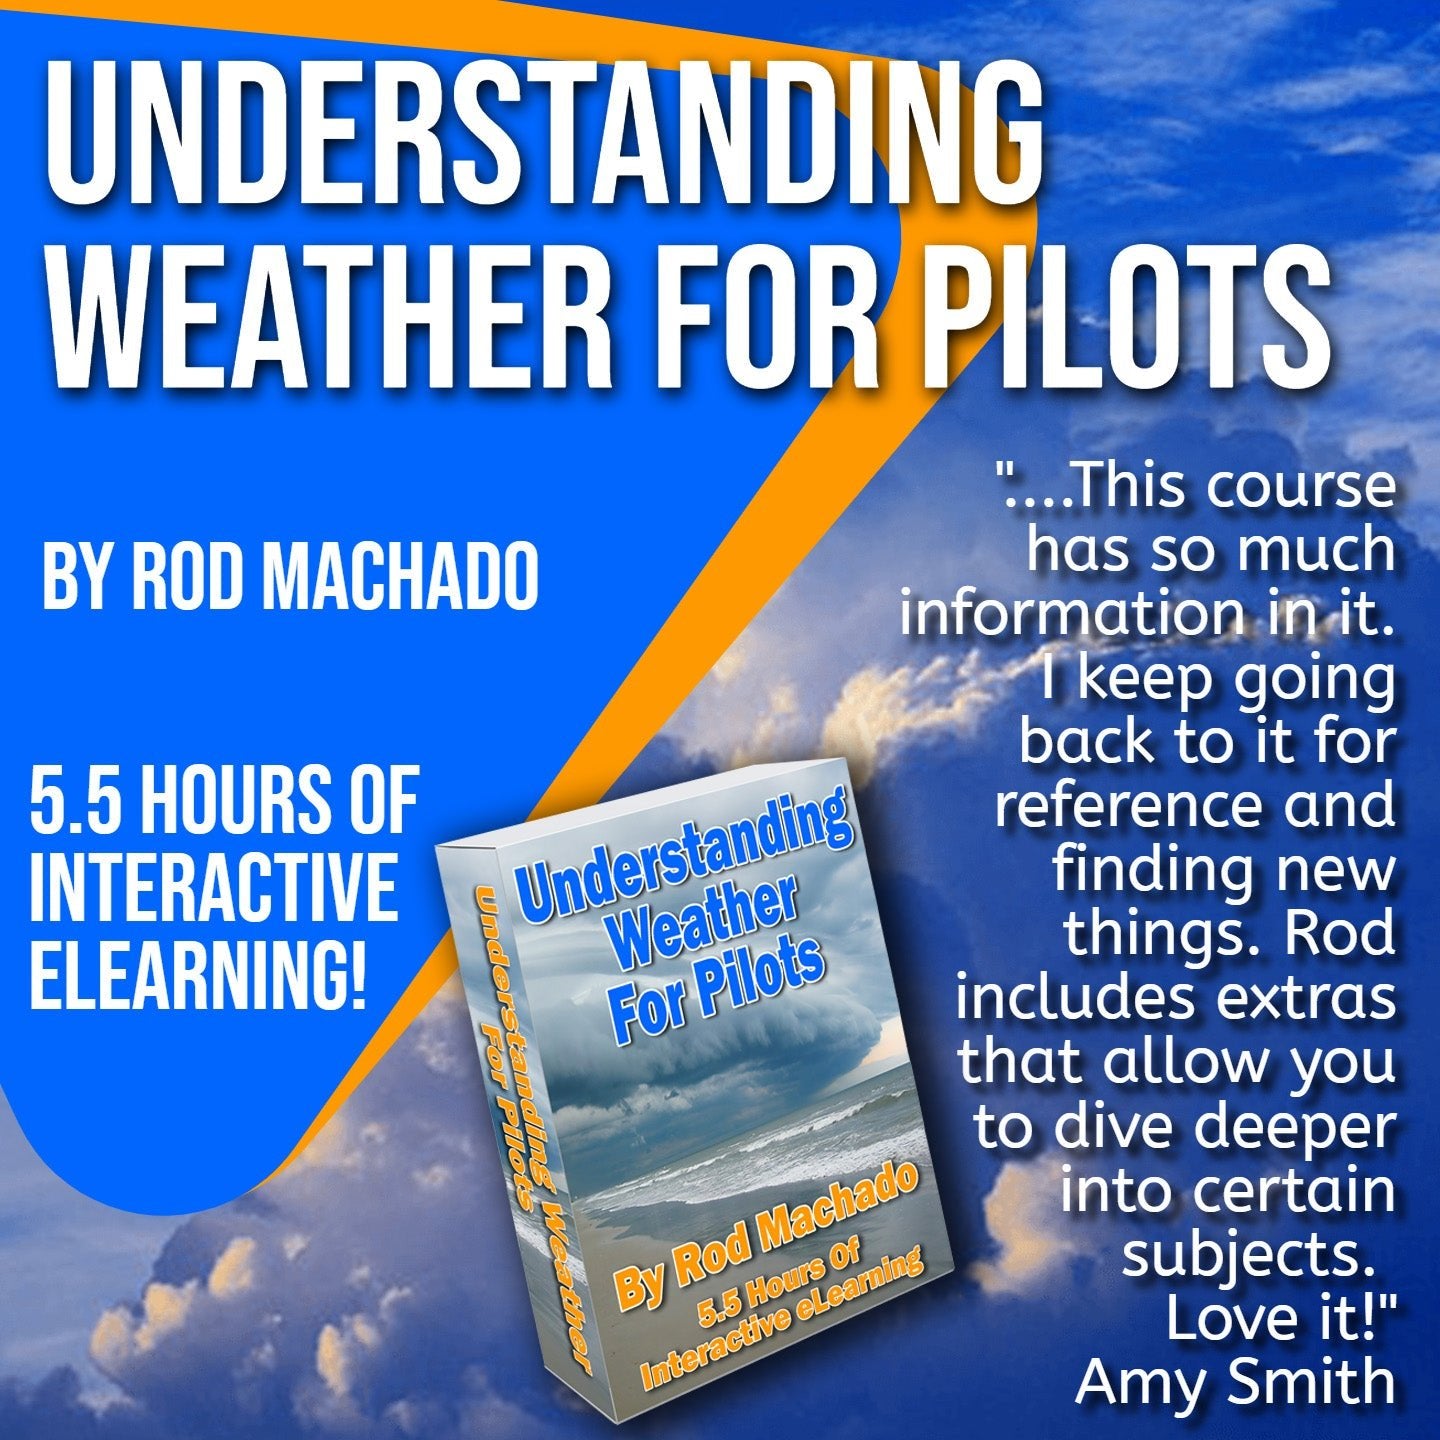 Rod Machado's Understanding Weather - Interactive eLearning Course provides pilots with a comprehensive understanding of weather.